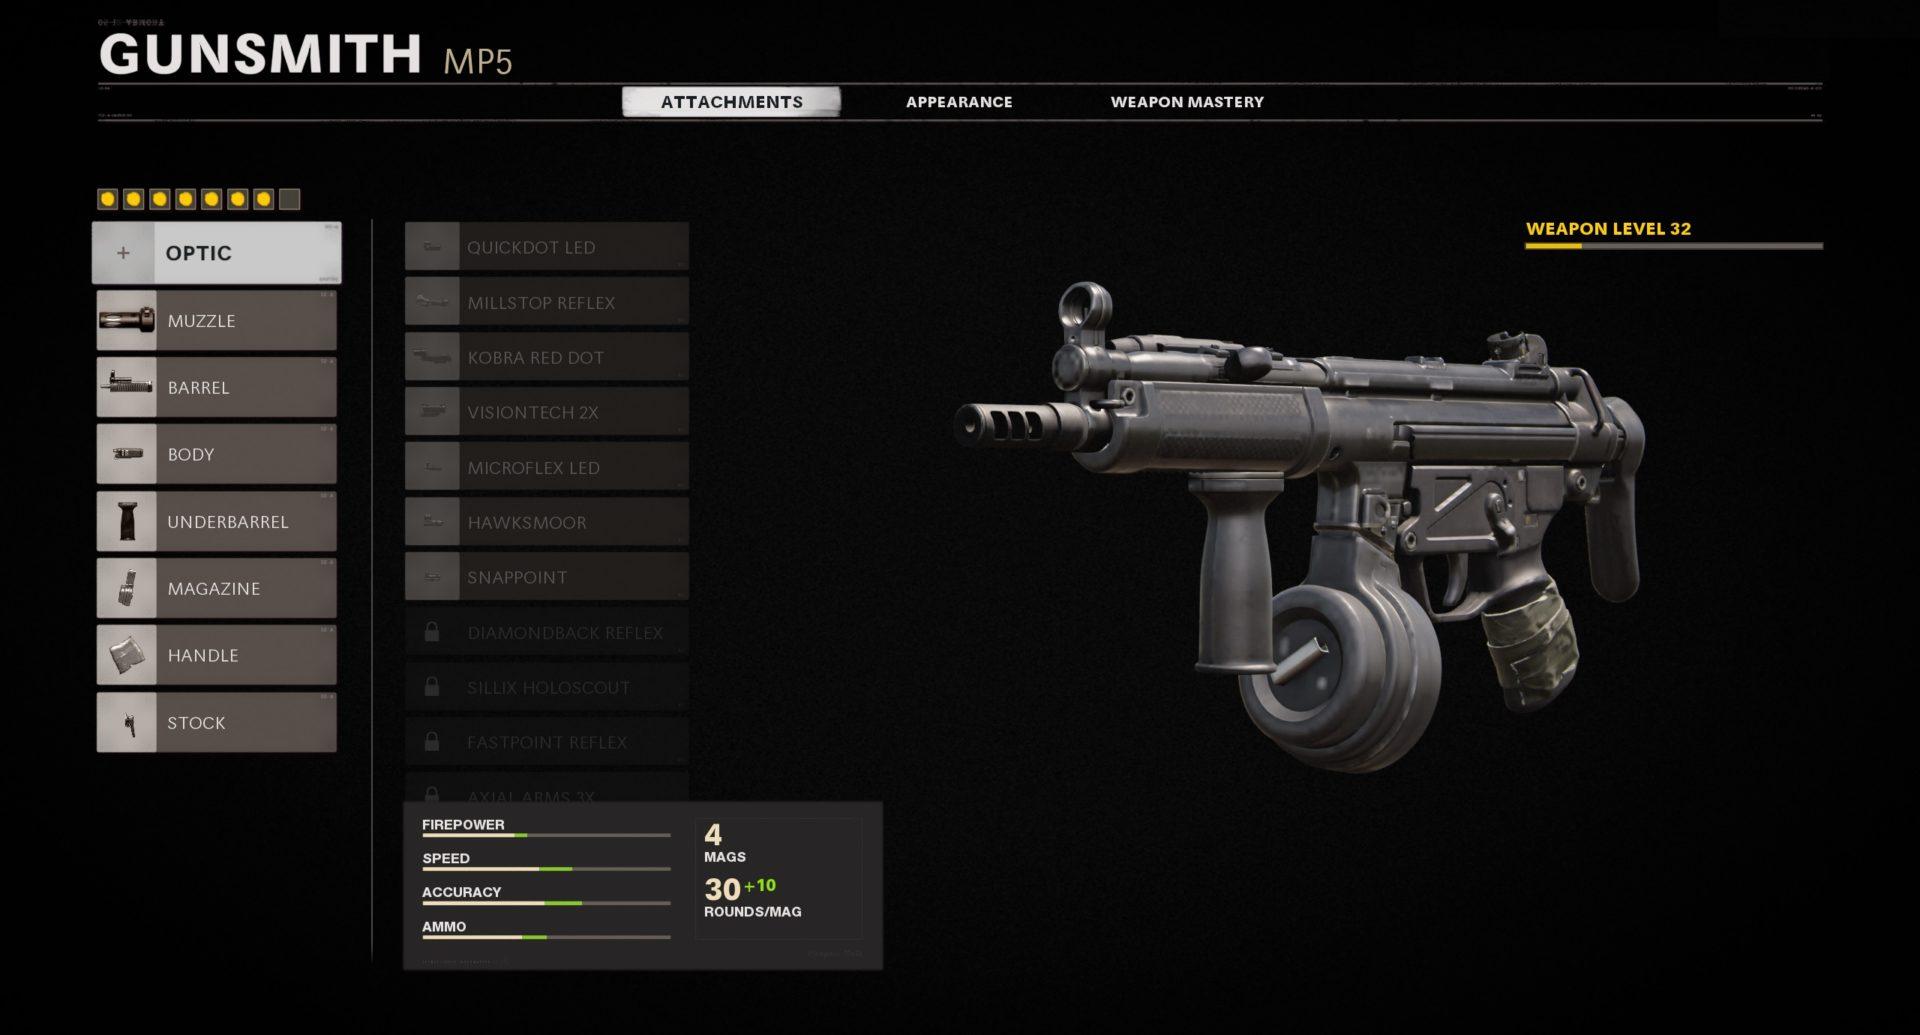 An image showing the Black Ops Cold War MP5 weapon in the Gunsmith